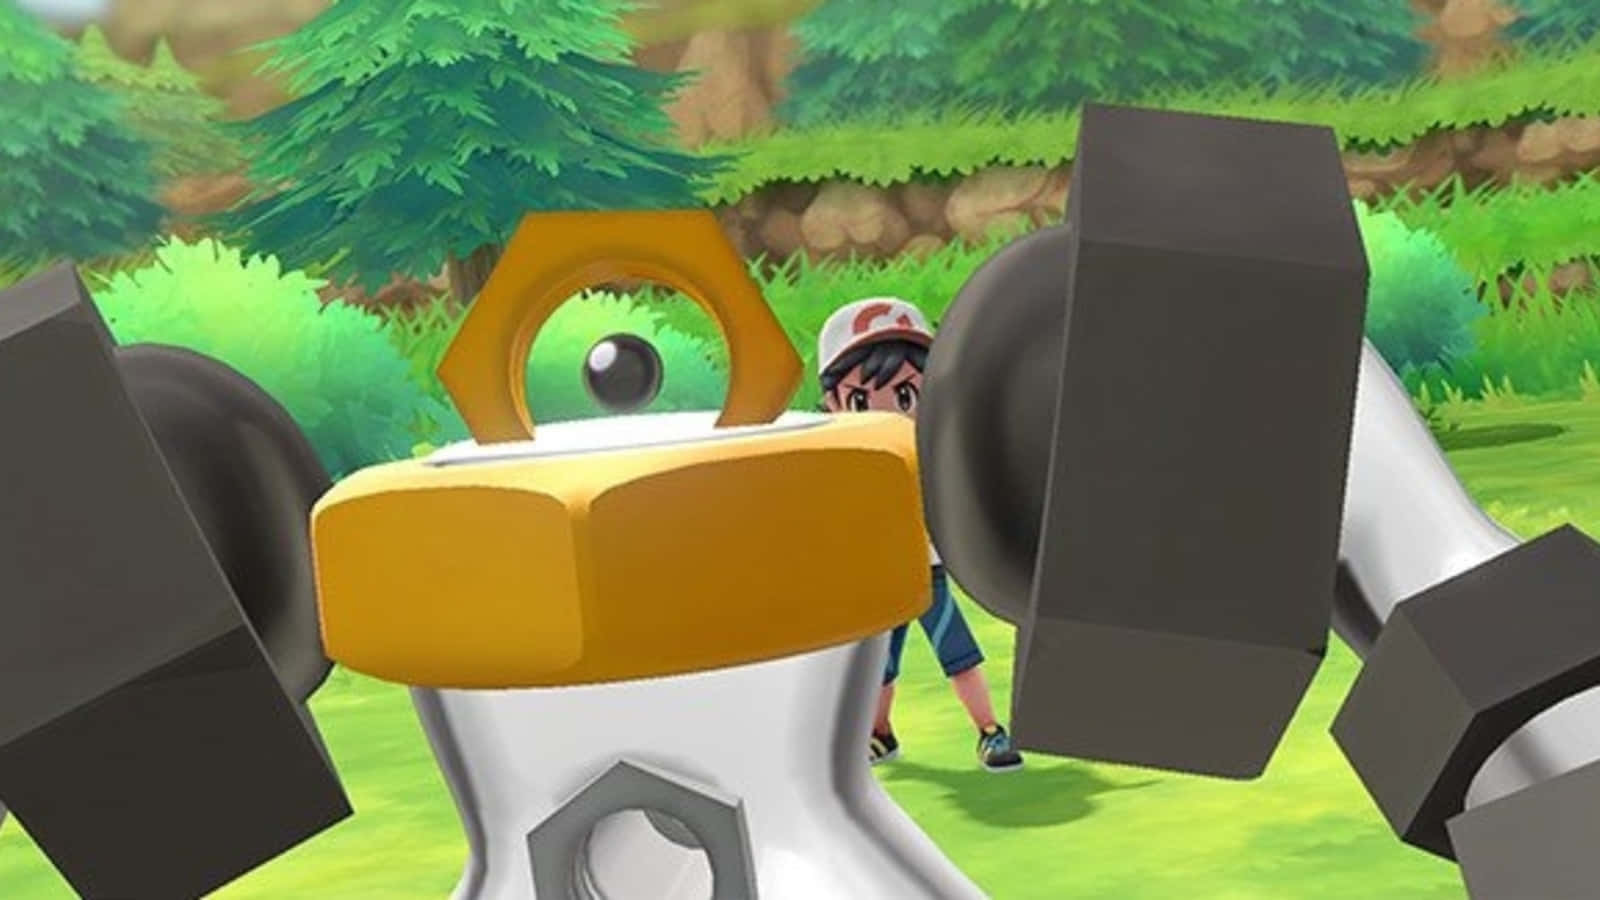 Melmetal With Trainer Behind Wallpaper